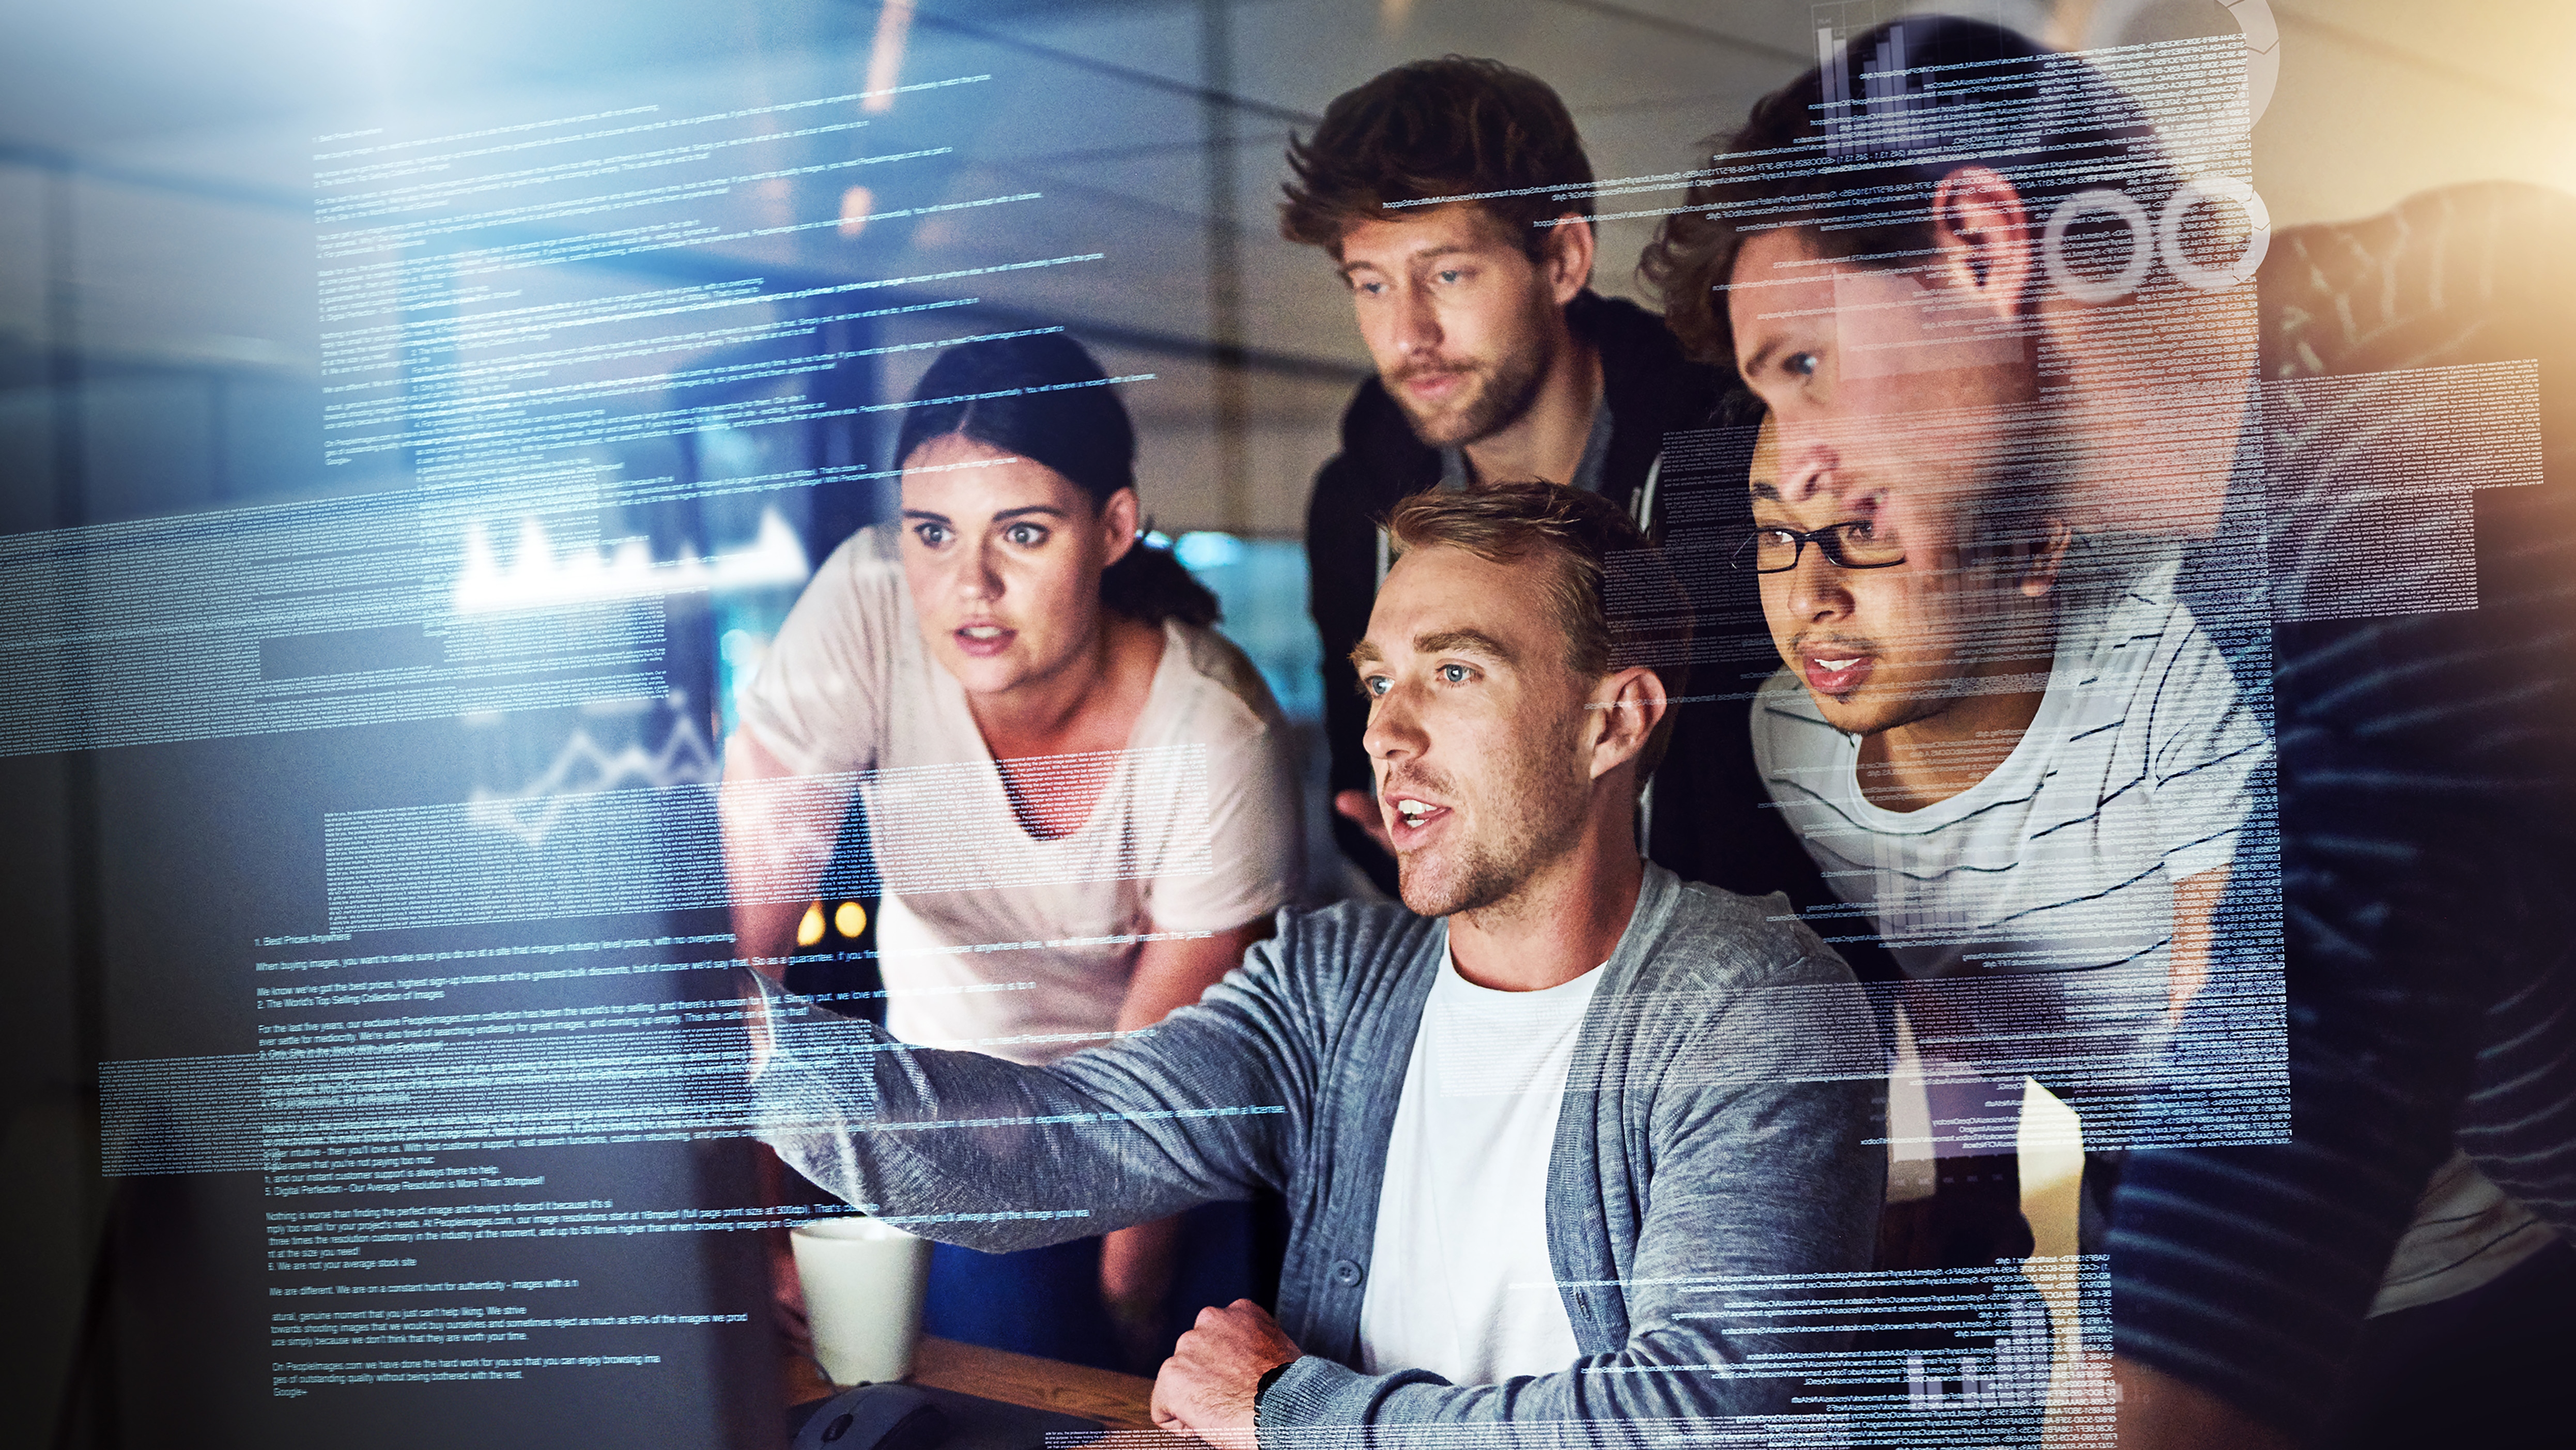 Group of people gathered around a computer screen